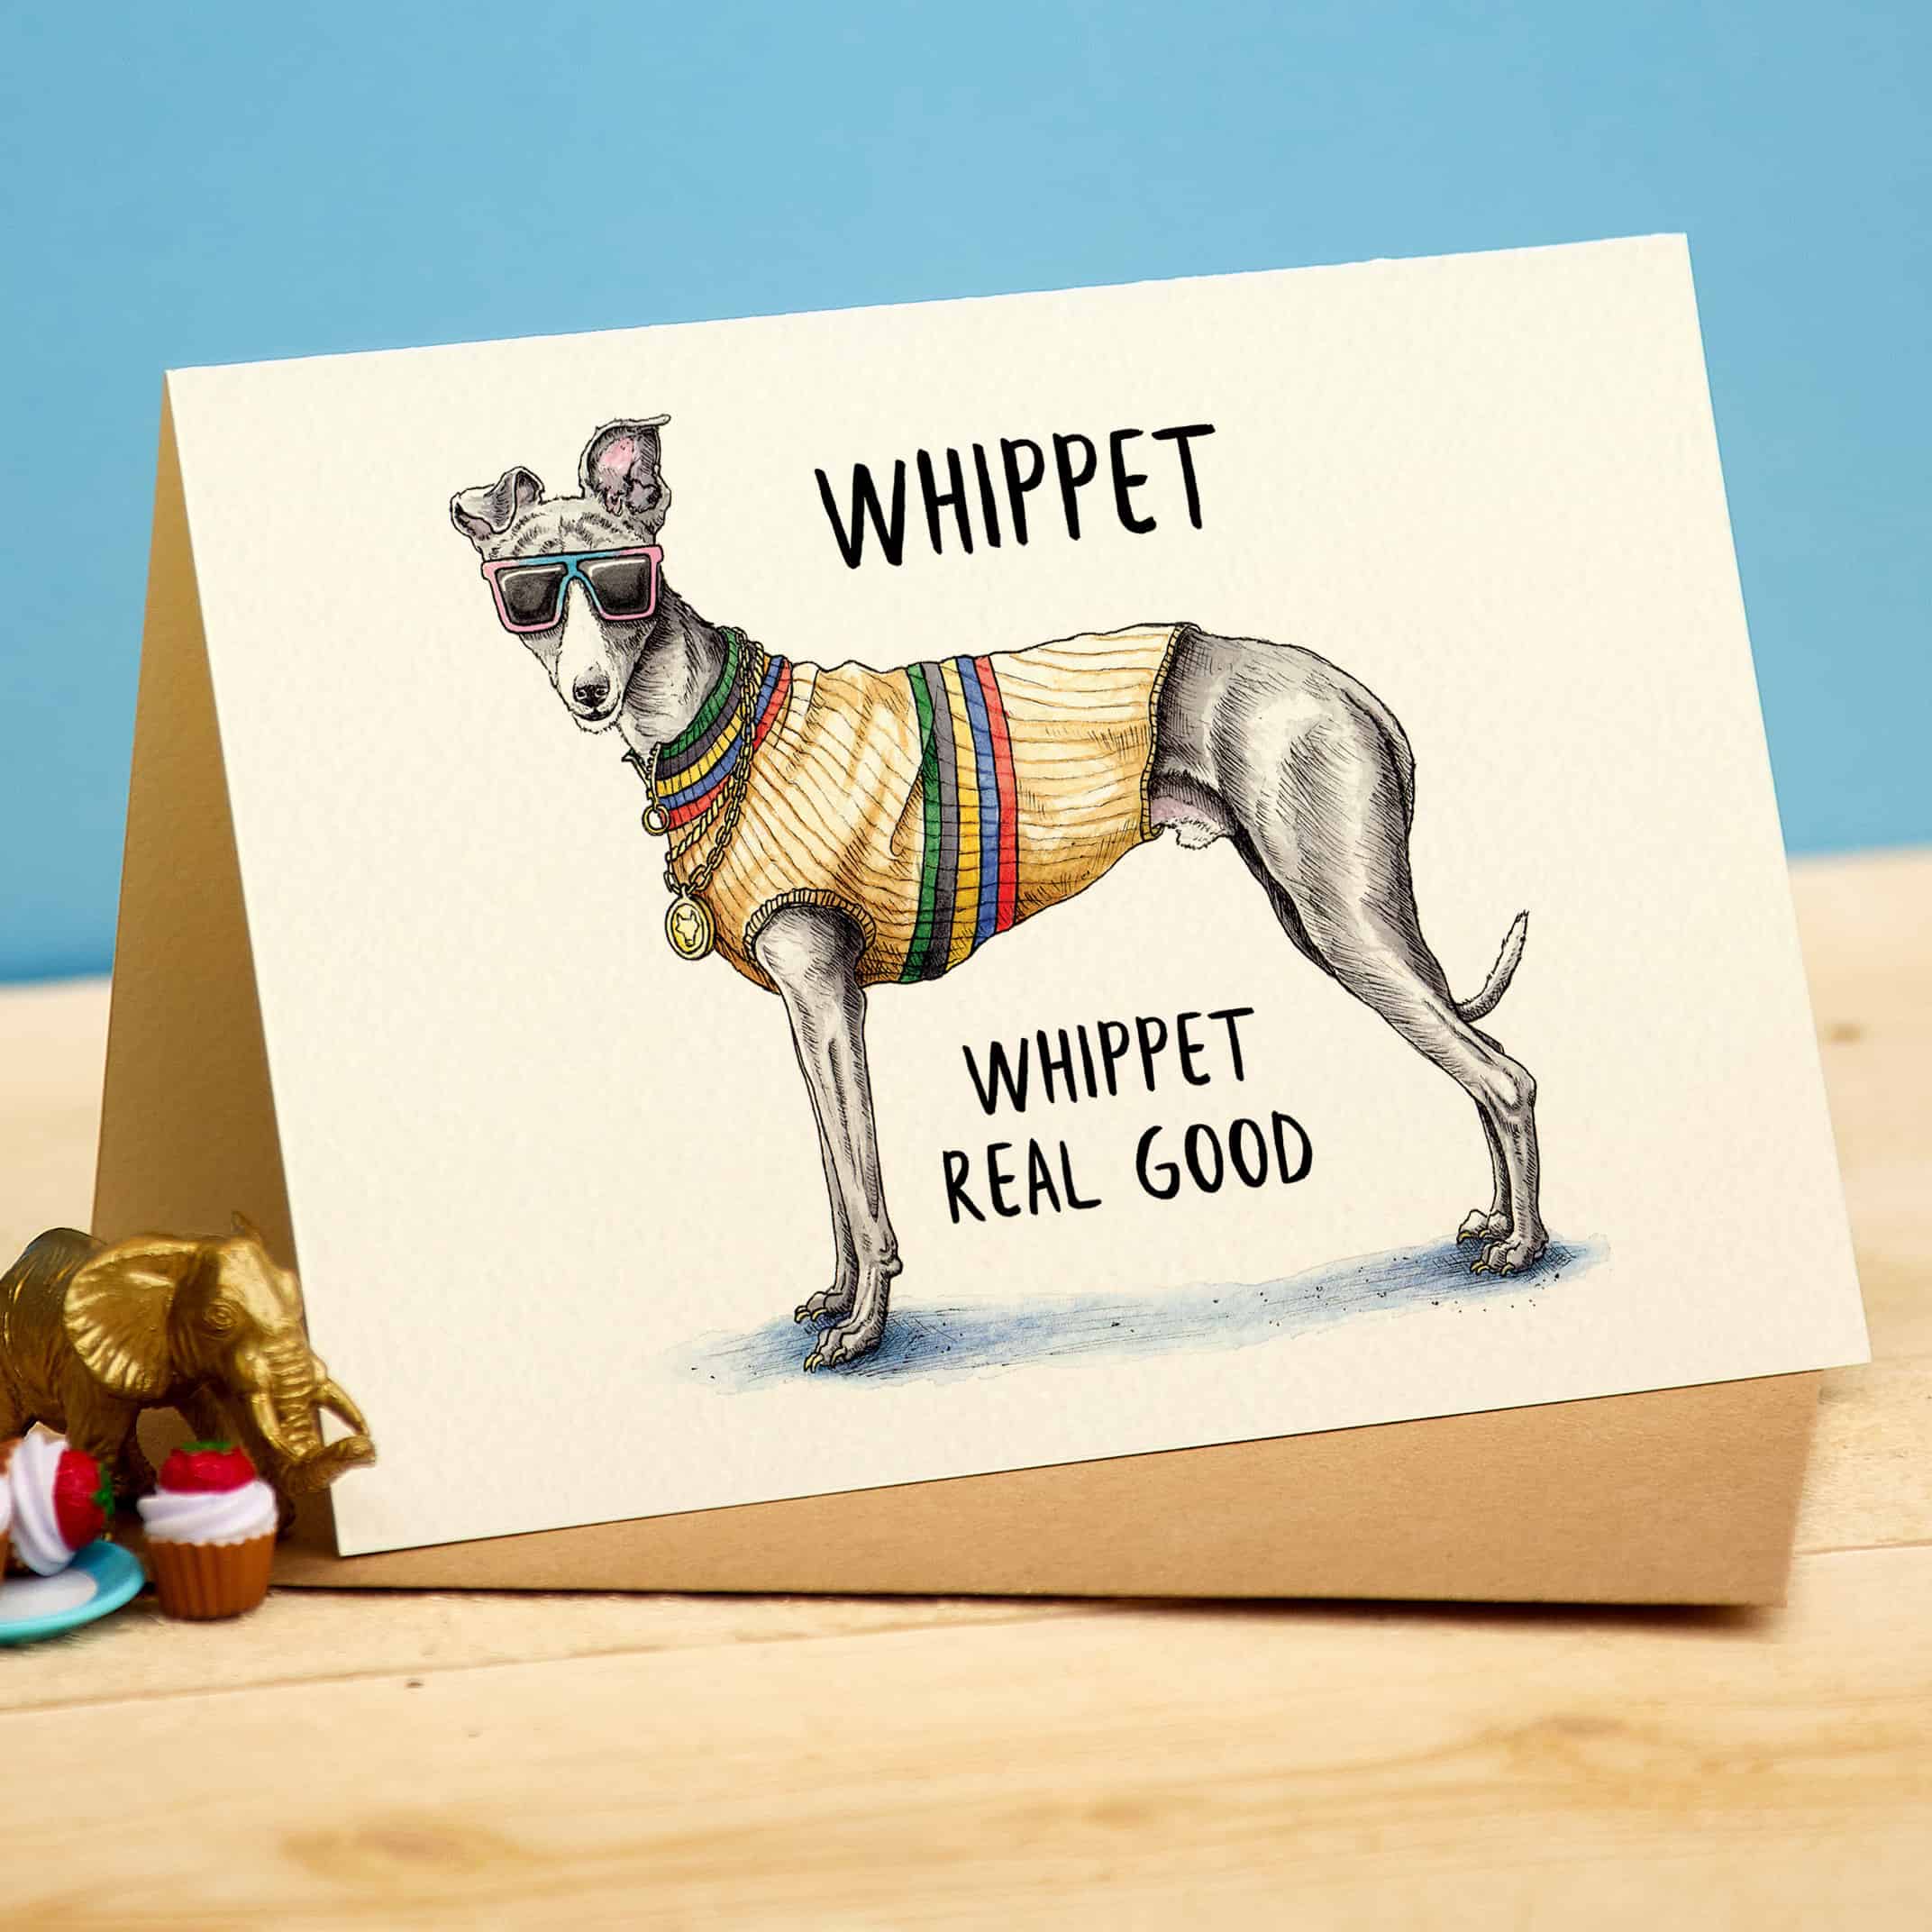 Greeting card whippet "Whippet real good"-Fairy Positron